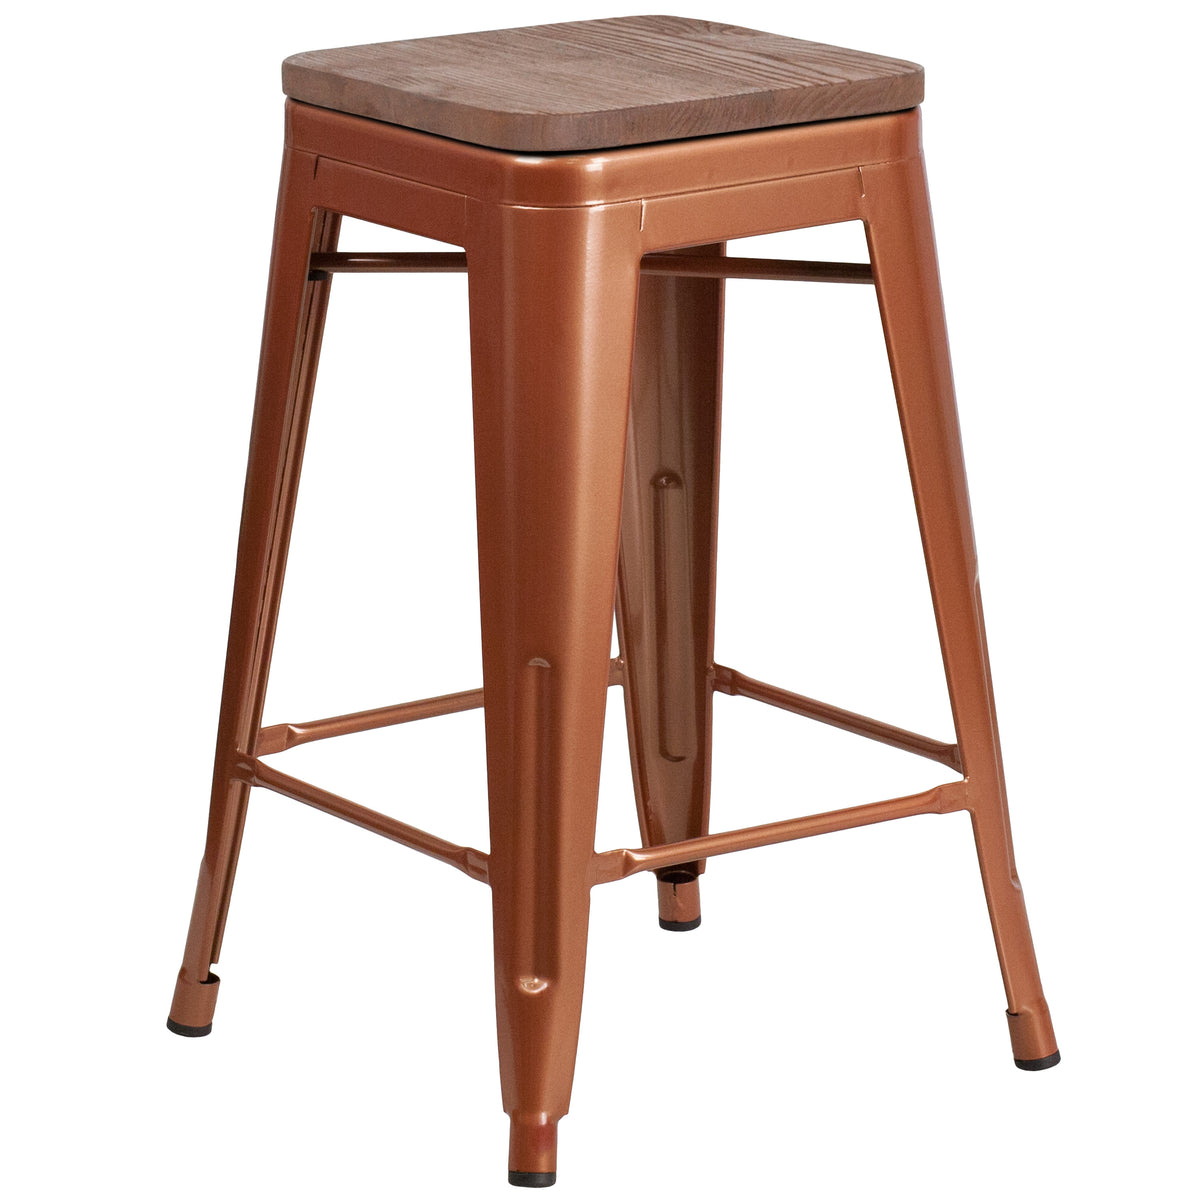 Copper |#| 24inch High Backless Copper Counter Height Stool with Square Wood Seat